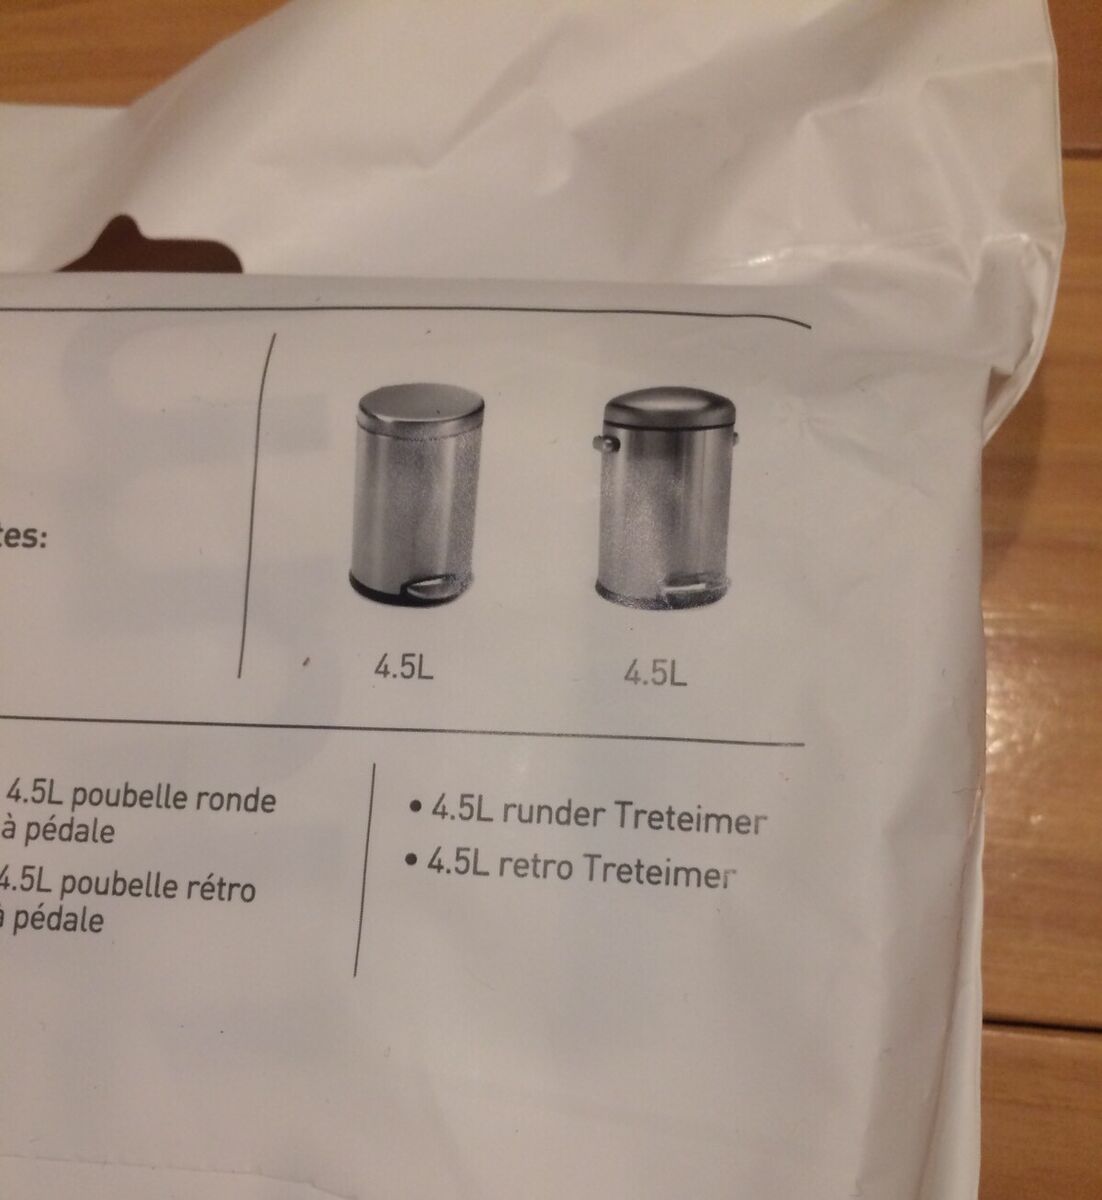 Code K 20Ct SIMPLEHUMAN Custom Fit Trash Bags Can Liners Refill Size White  Pack